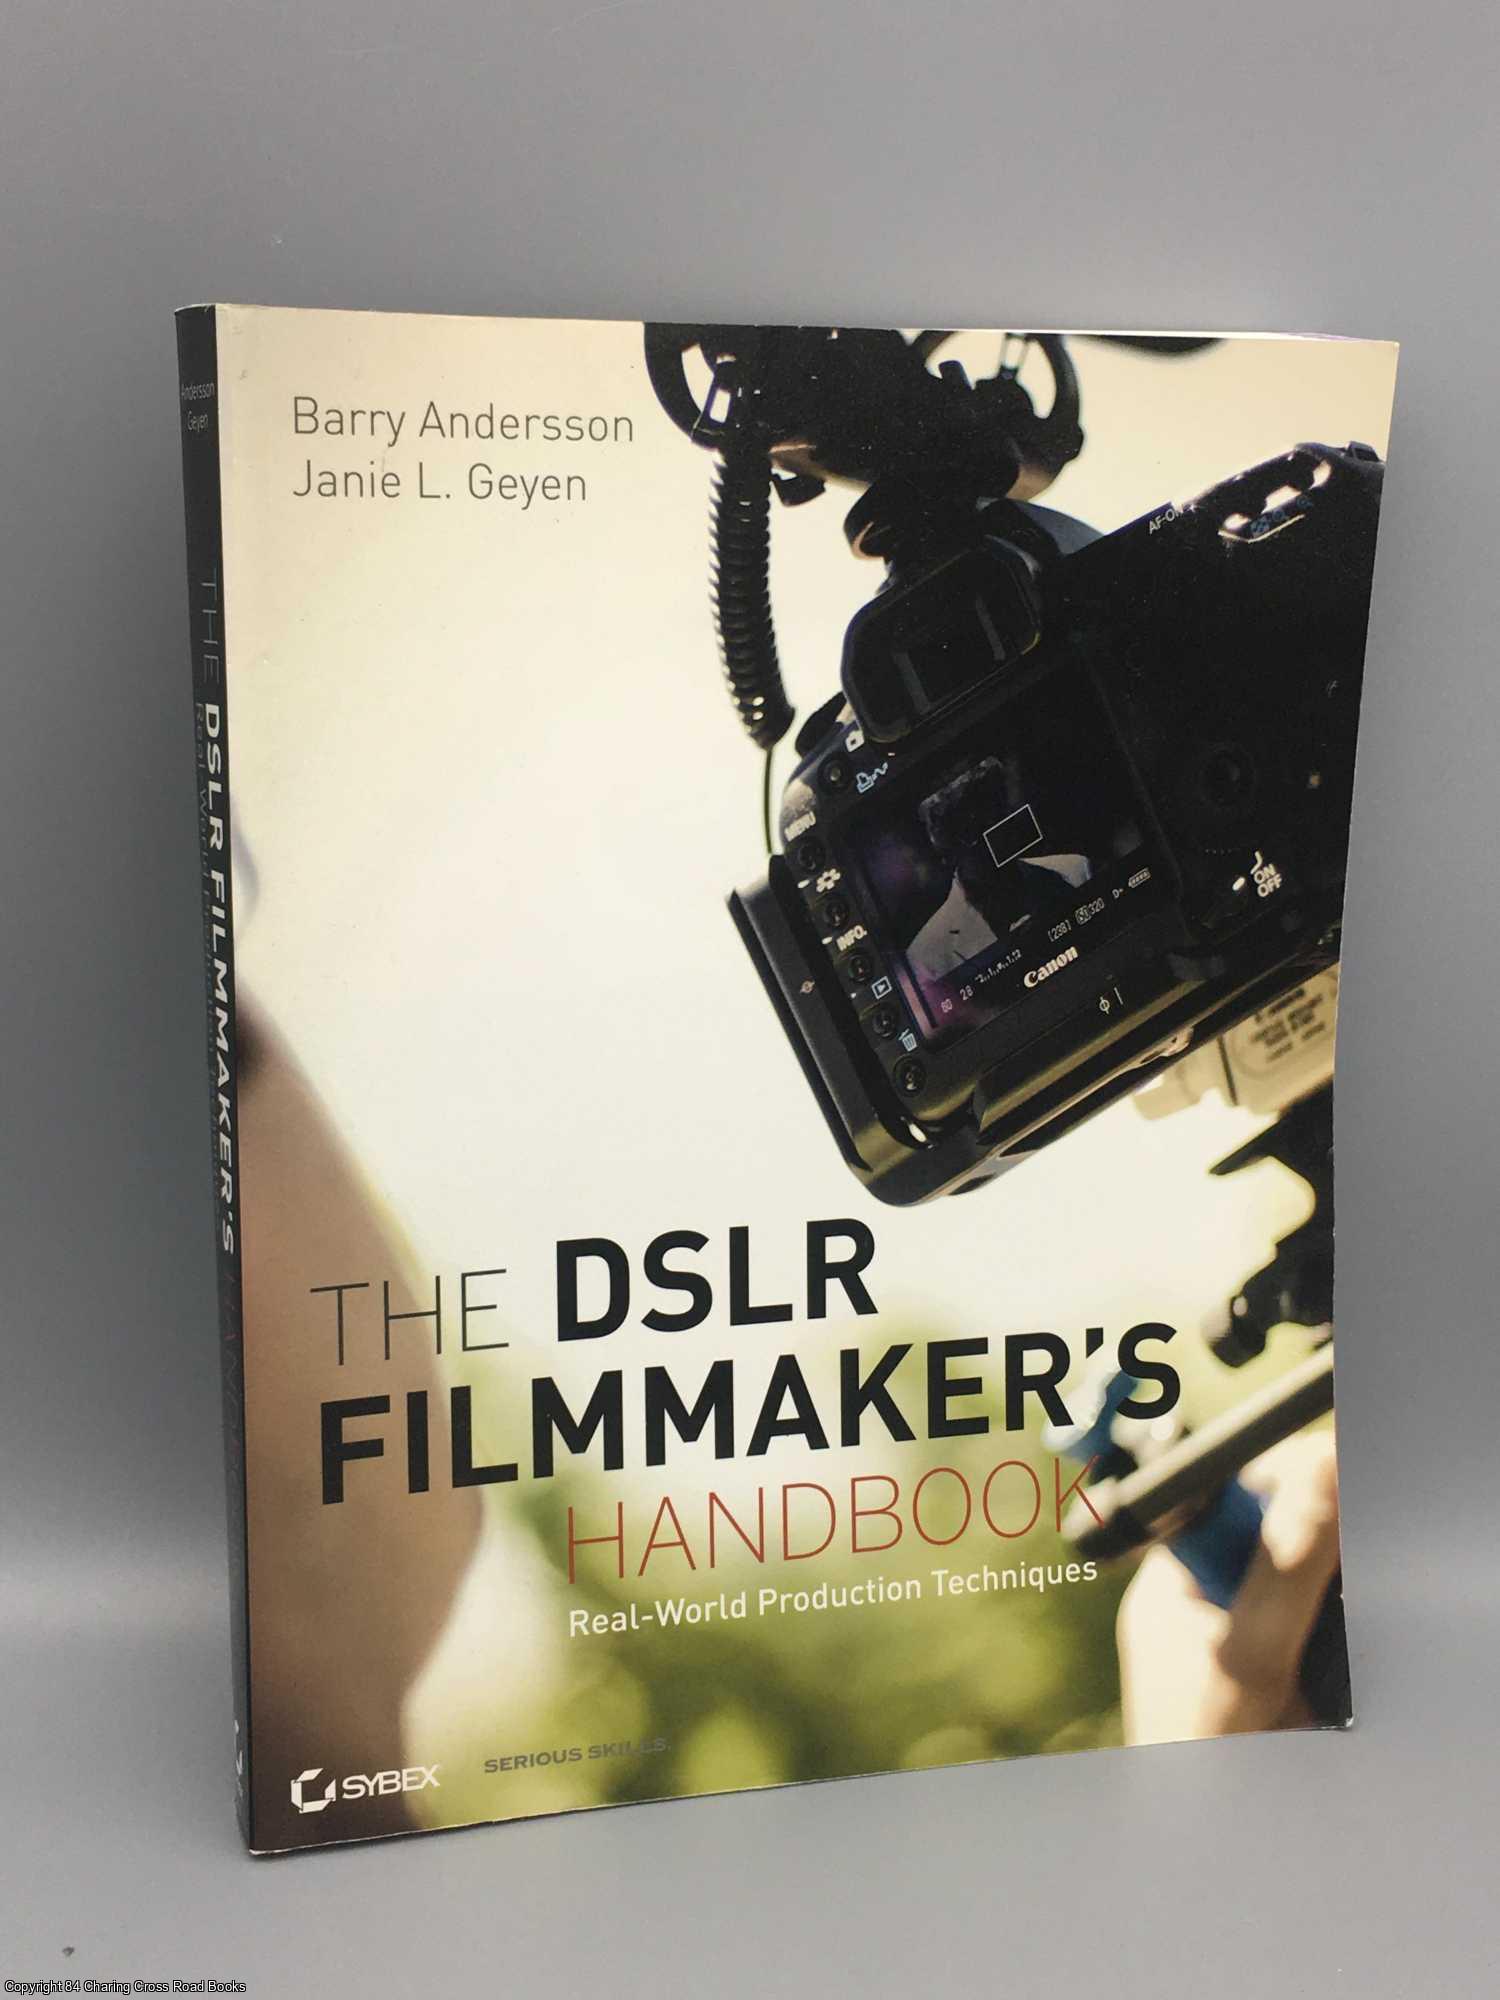 Andersson, Barry - The DSLR Filmmaker's Handbook: Real-World Production Techniques